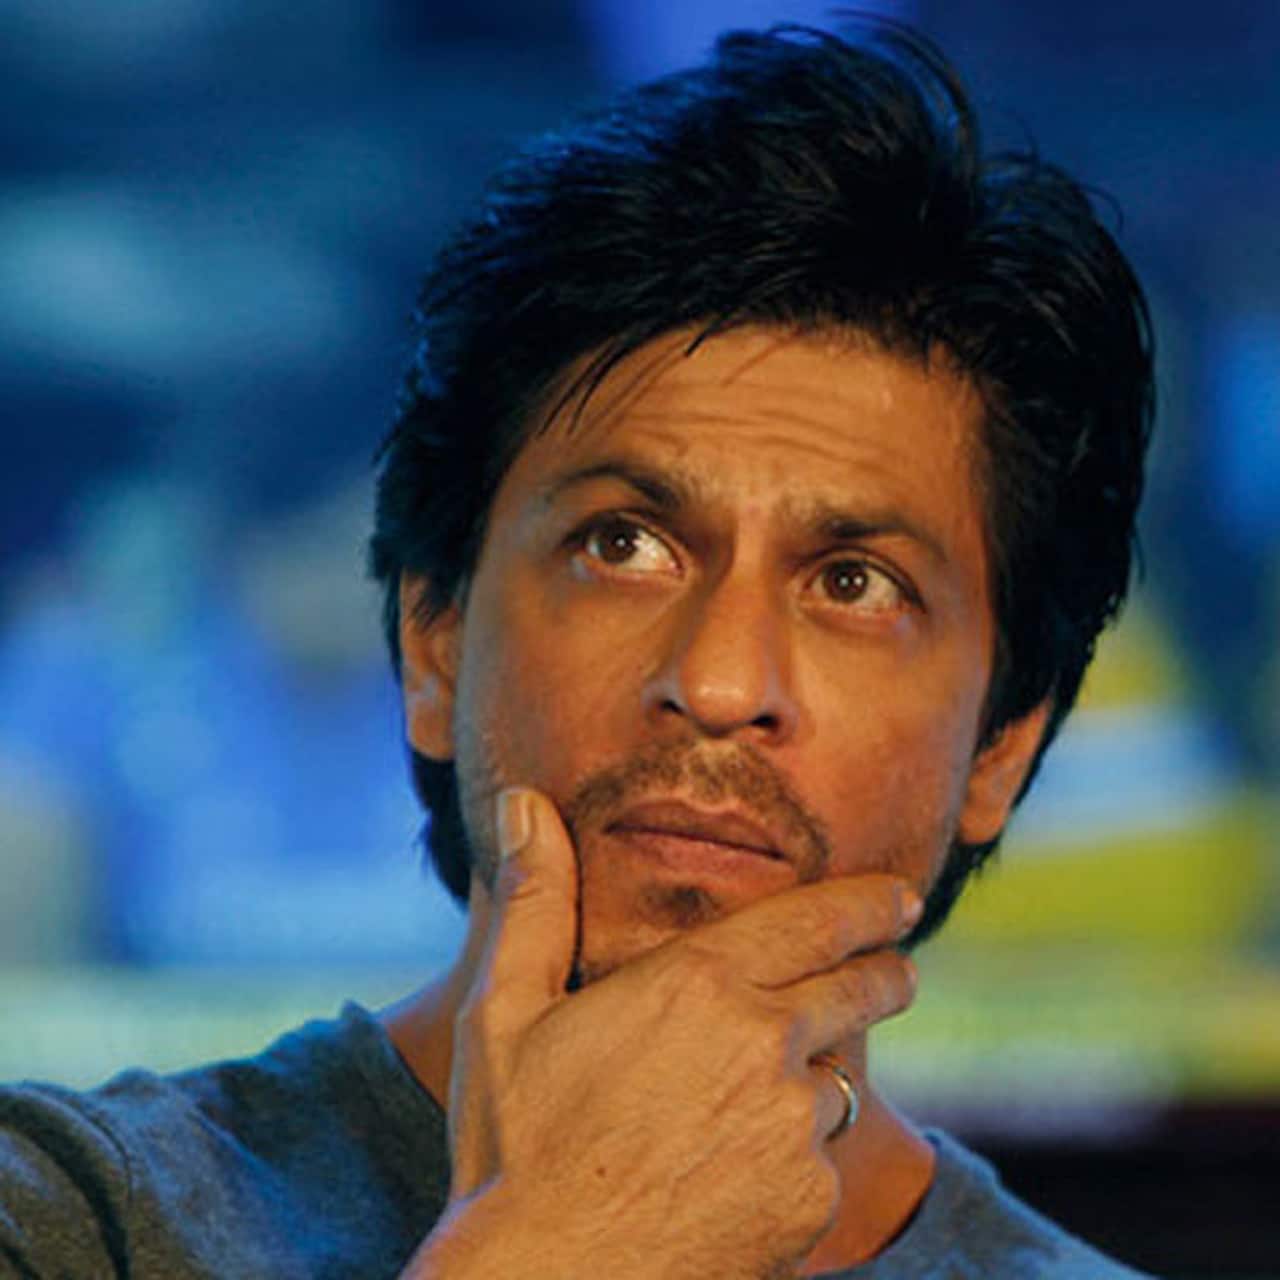 Shah Rukh Khan S Fears Will Make You Scream Unbelievable Bollywood News And Gossip Movie